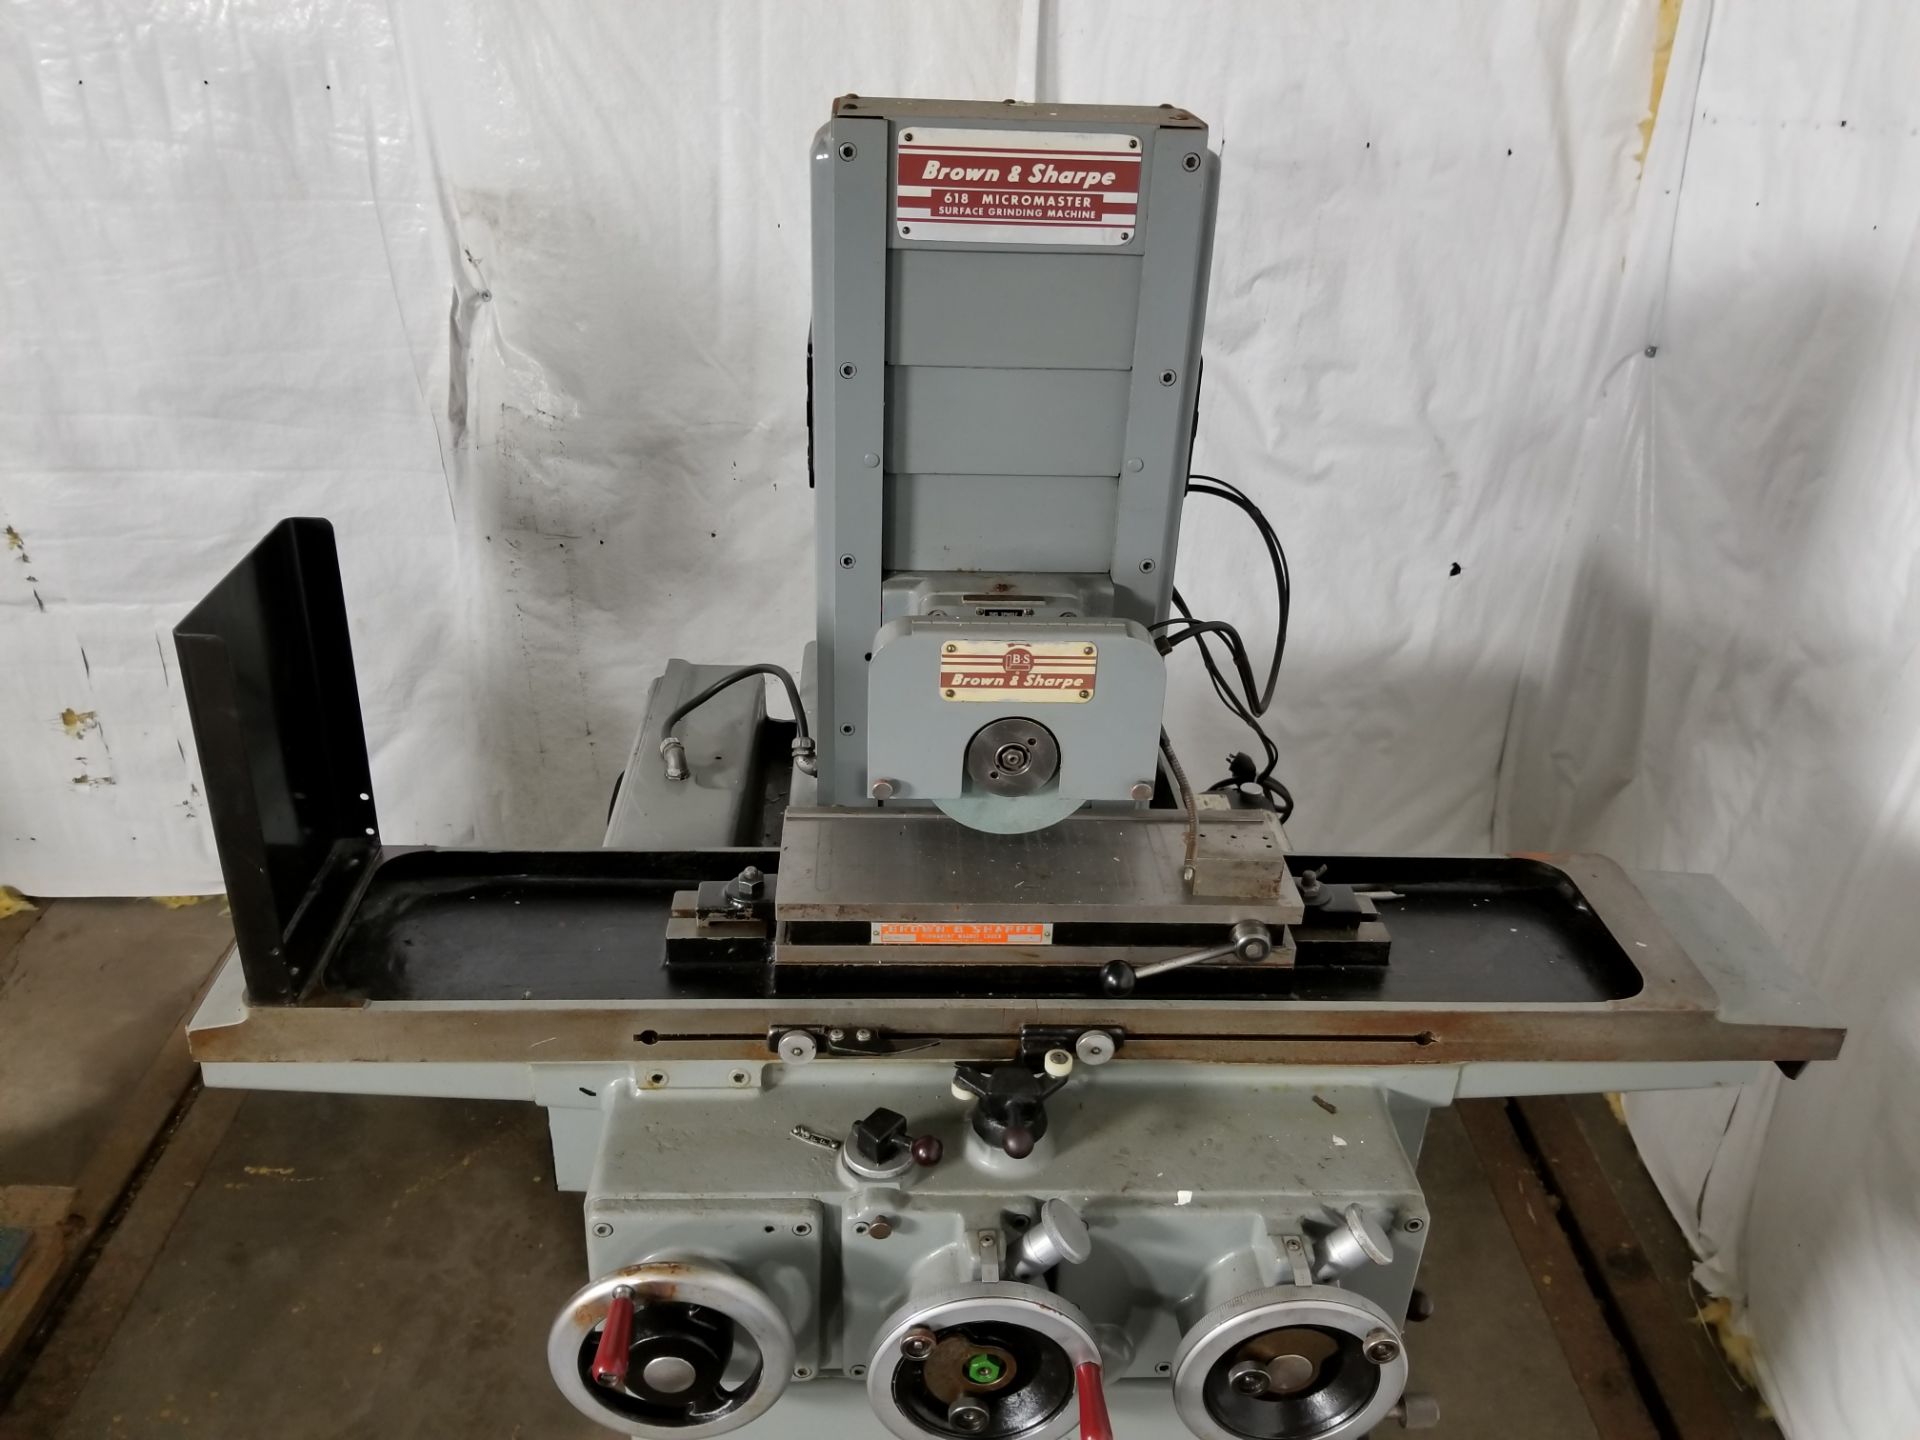 1966 BROWN & SHARPE MICROMASTER HYDRAULIC SURFACE GRINDER, MODEL 618, B&S PERMANENT MAGNETIC - Image 4 of 5